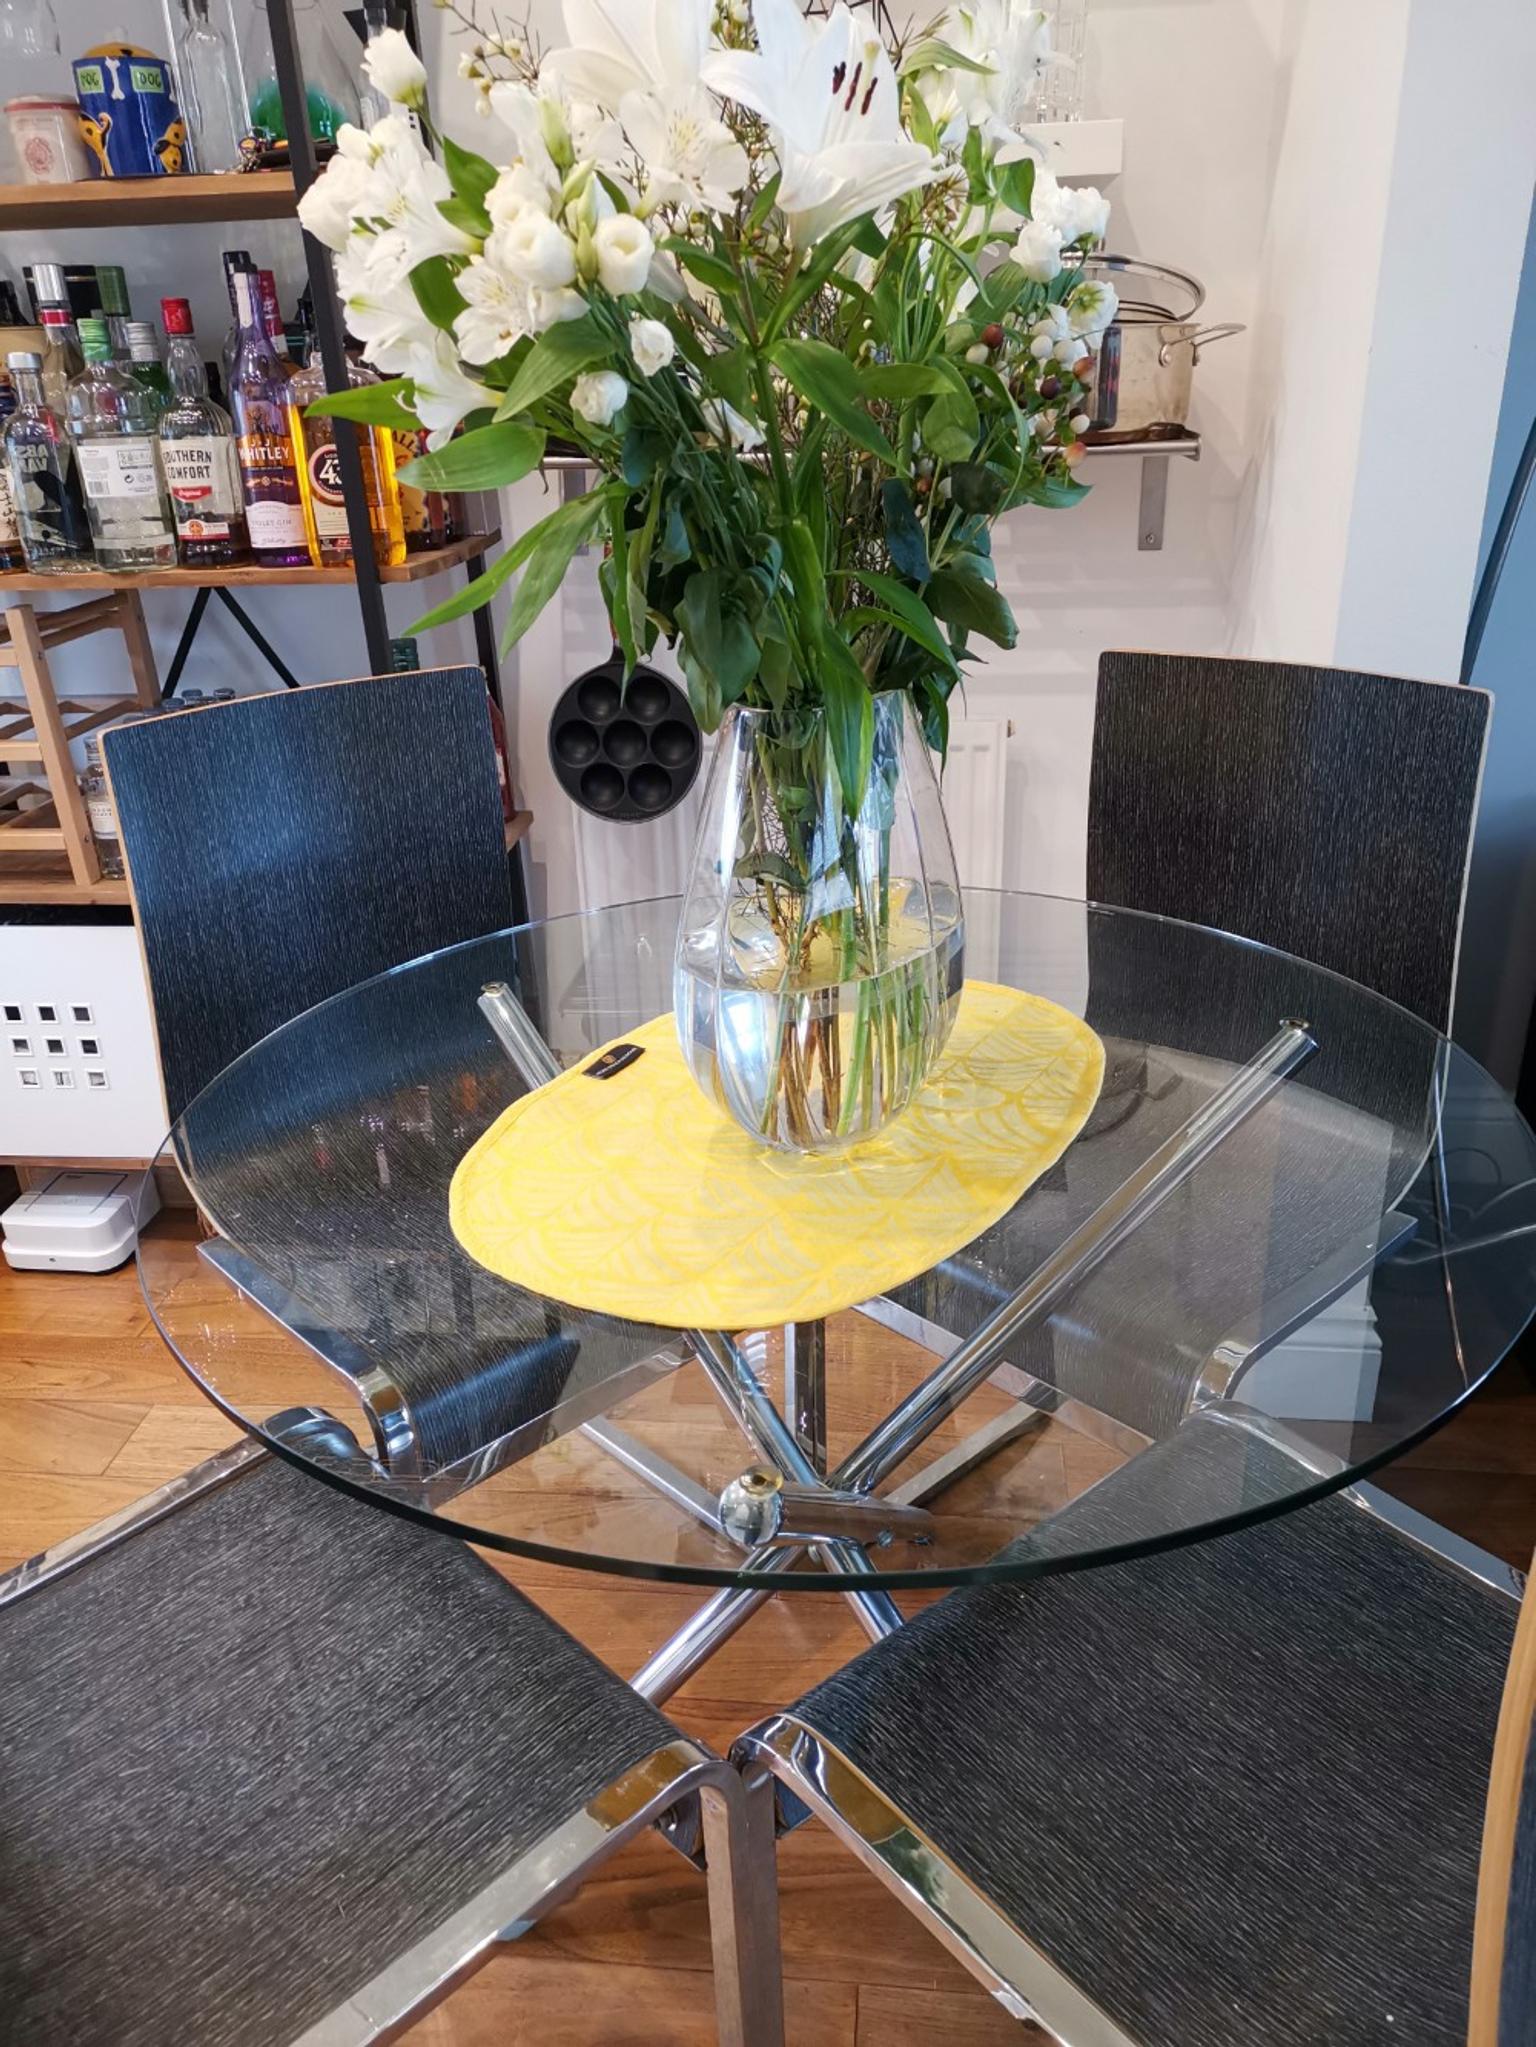 Dwell Tempered Glass Dining Table 4 Chairs In Sw8 London Fur 120 00 Zum Verkauf Shpock De